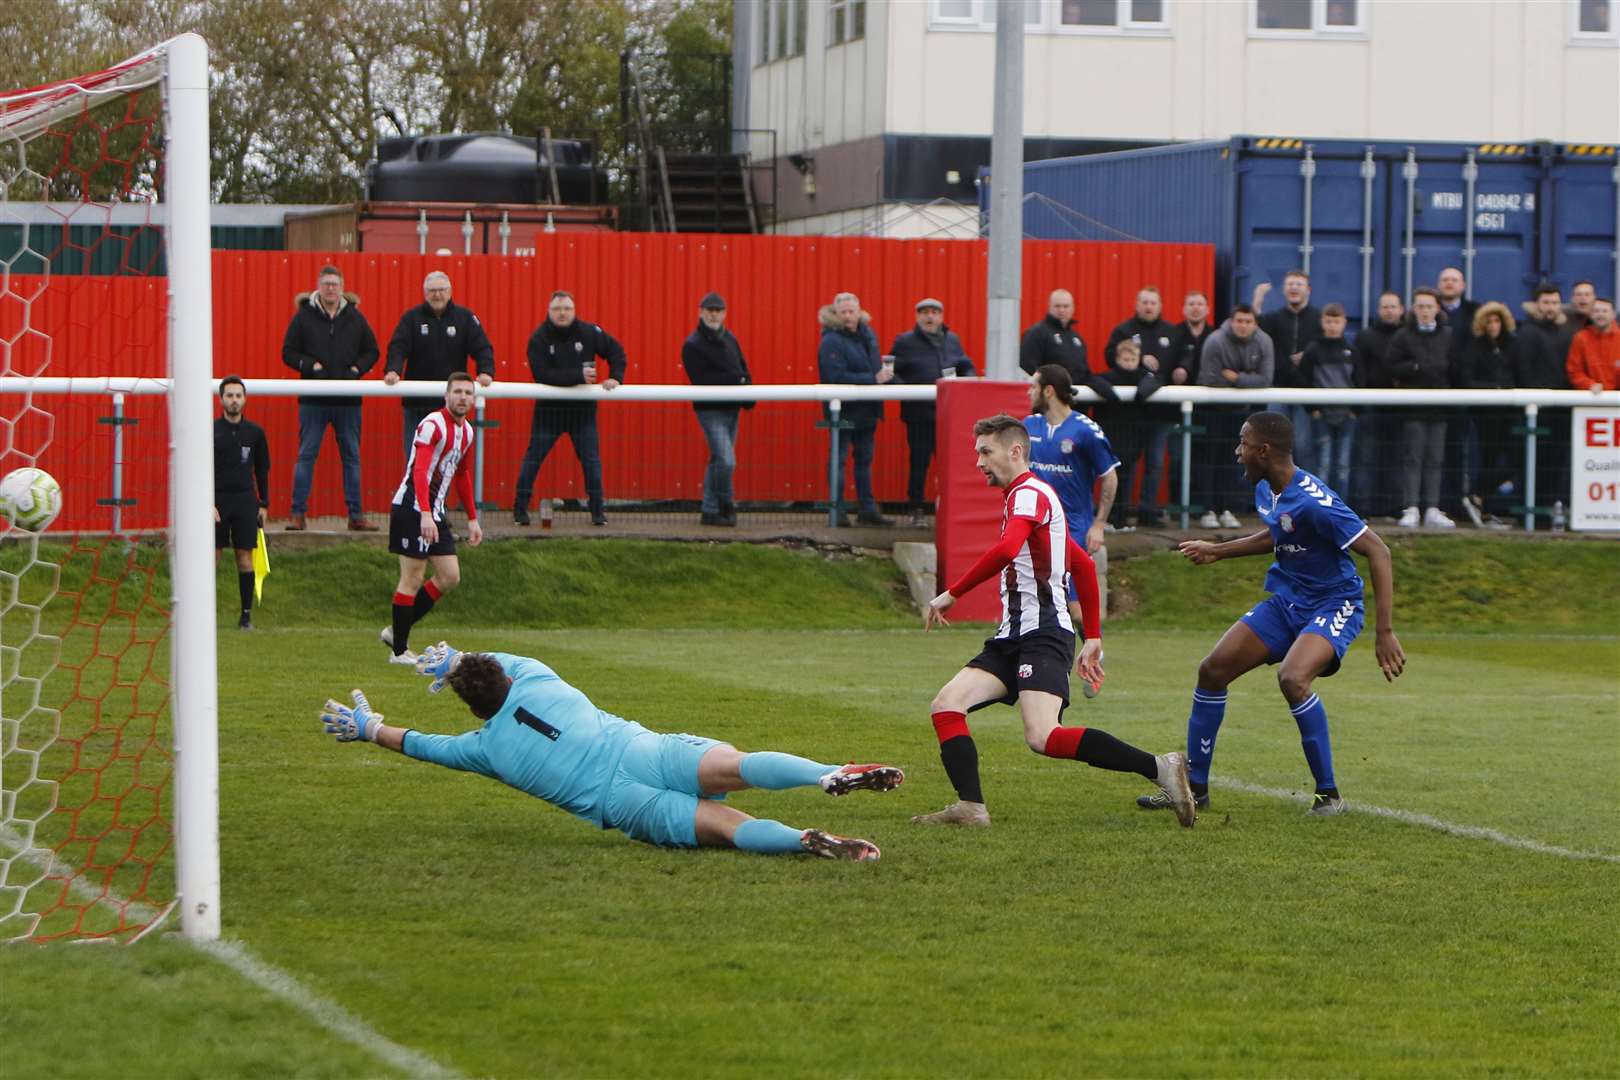 Dan Bradshaw scores one of his 45 goals for Sheppey United last season, against Beckenham Town Picture: Andy Jones